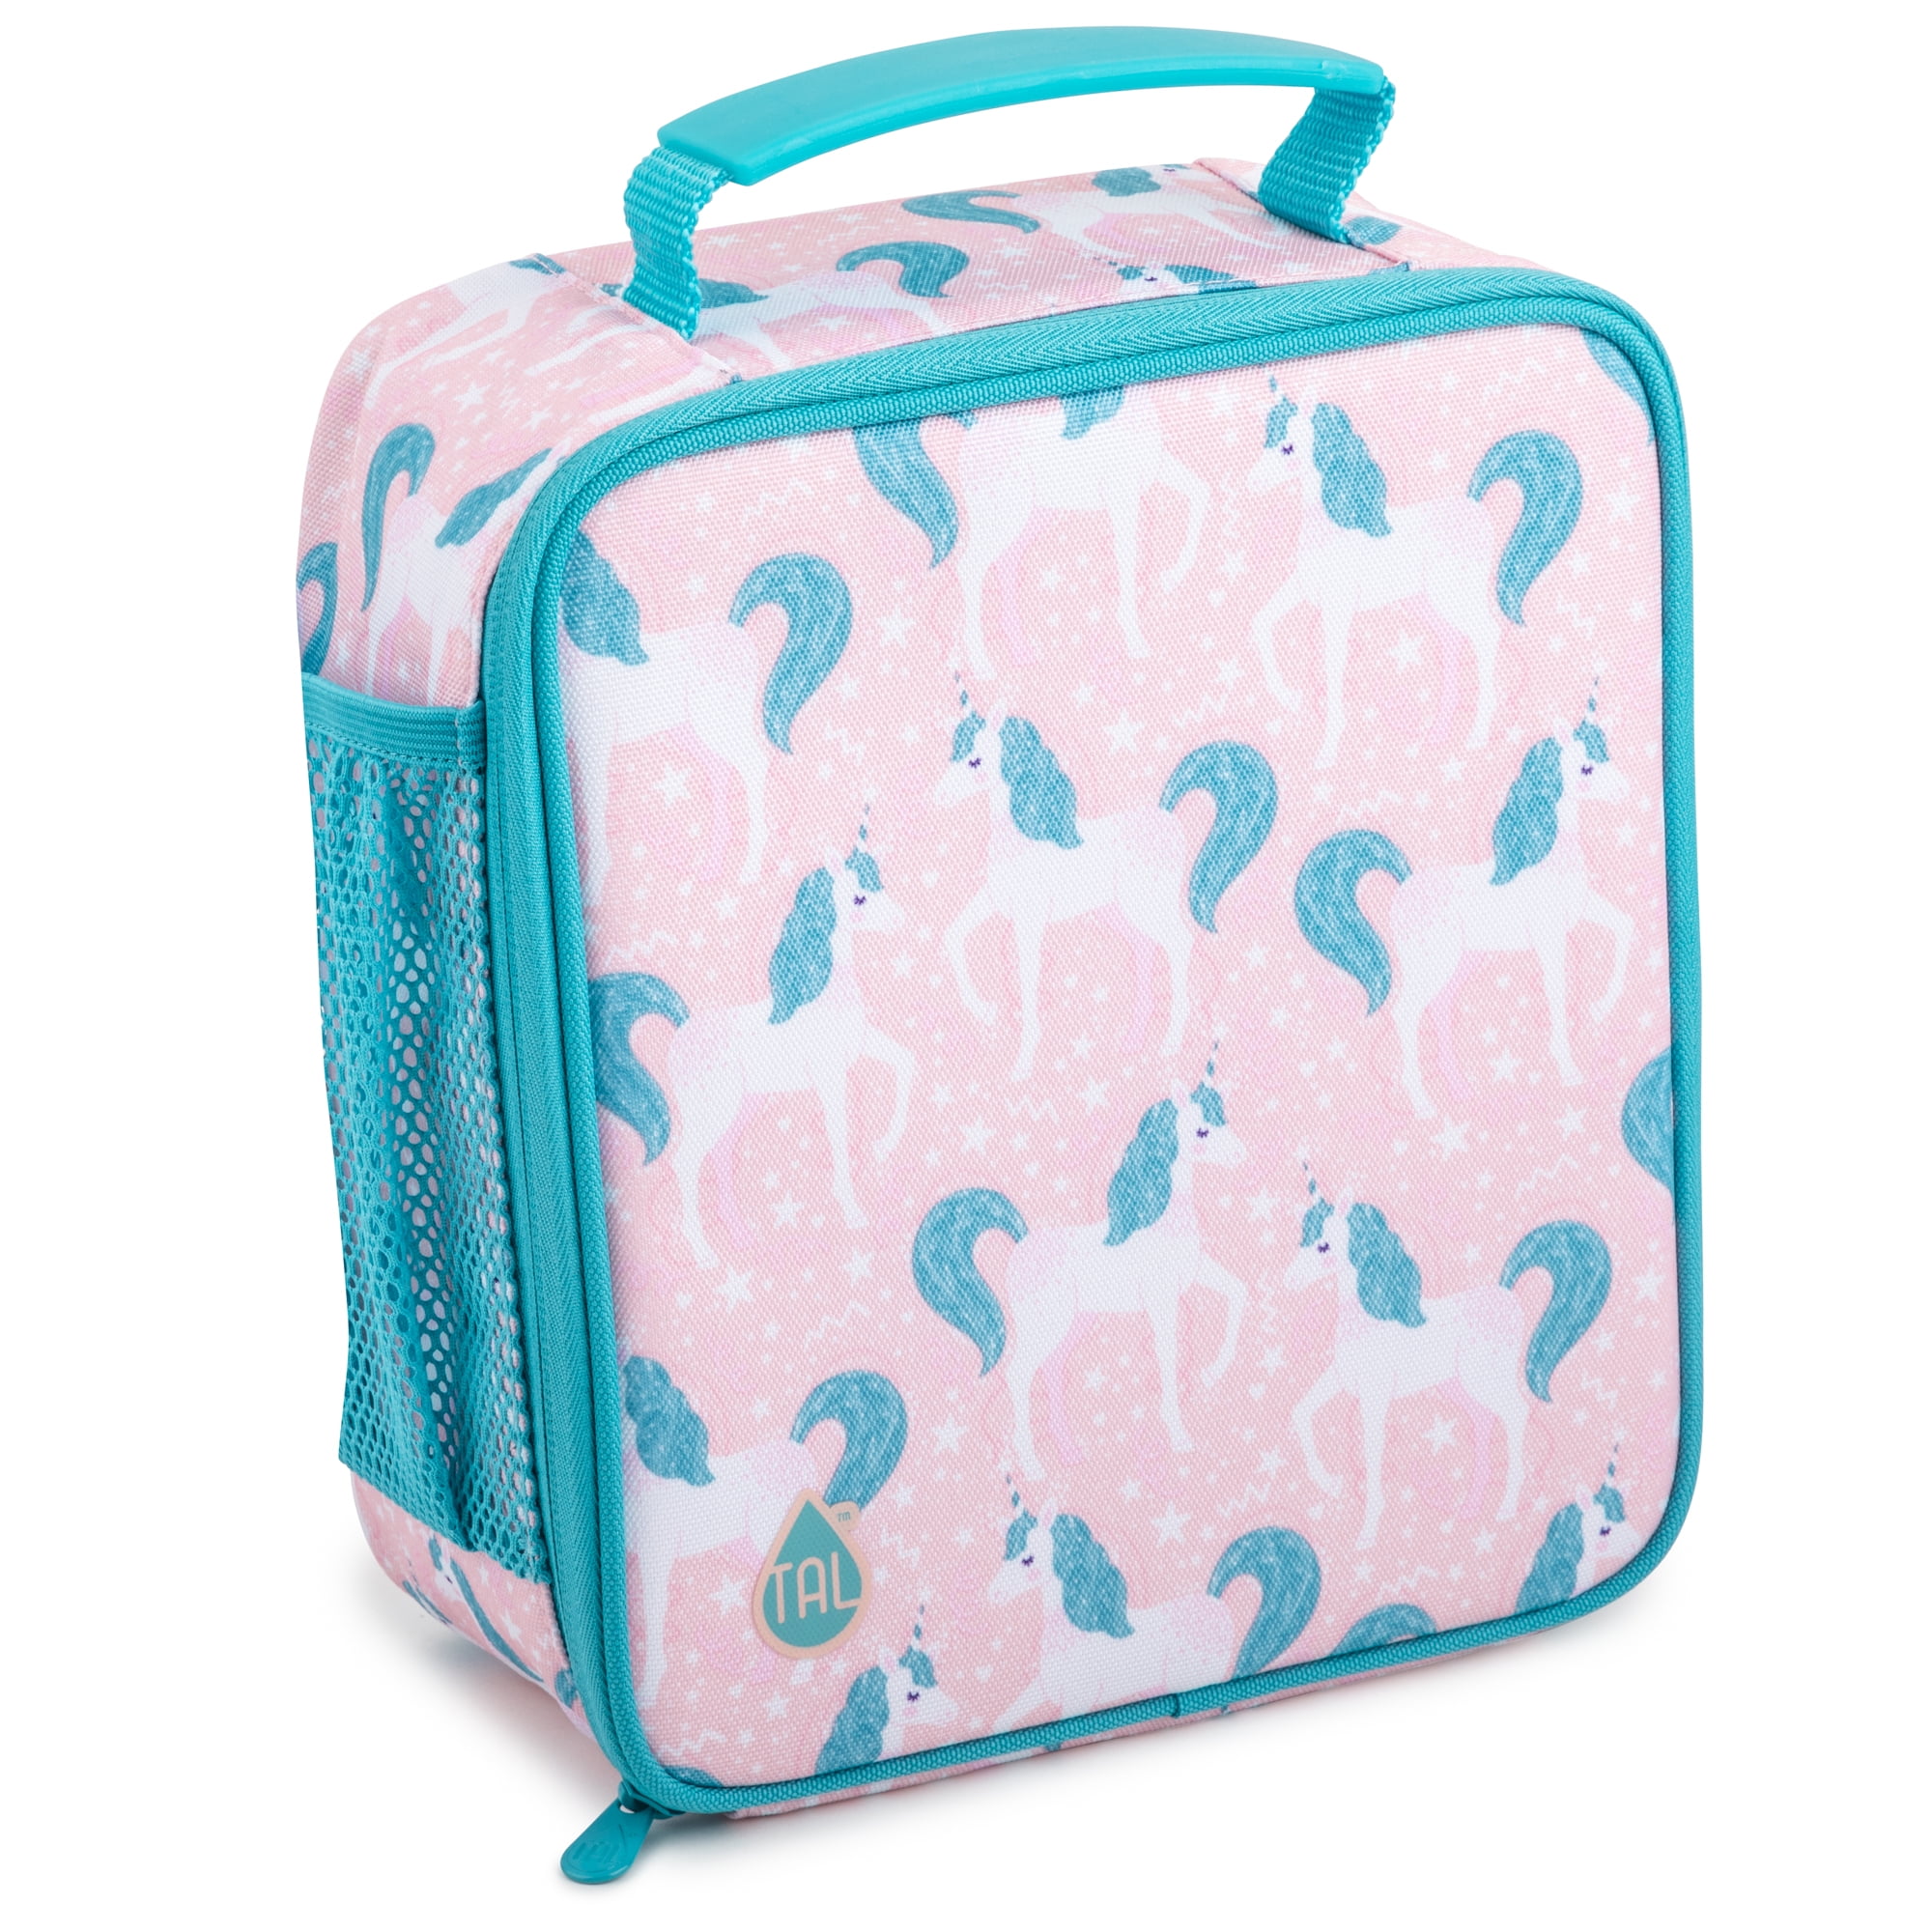 TAL Kids Insulated Reusable Soft Lunch Bag, Unicorn 